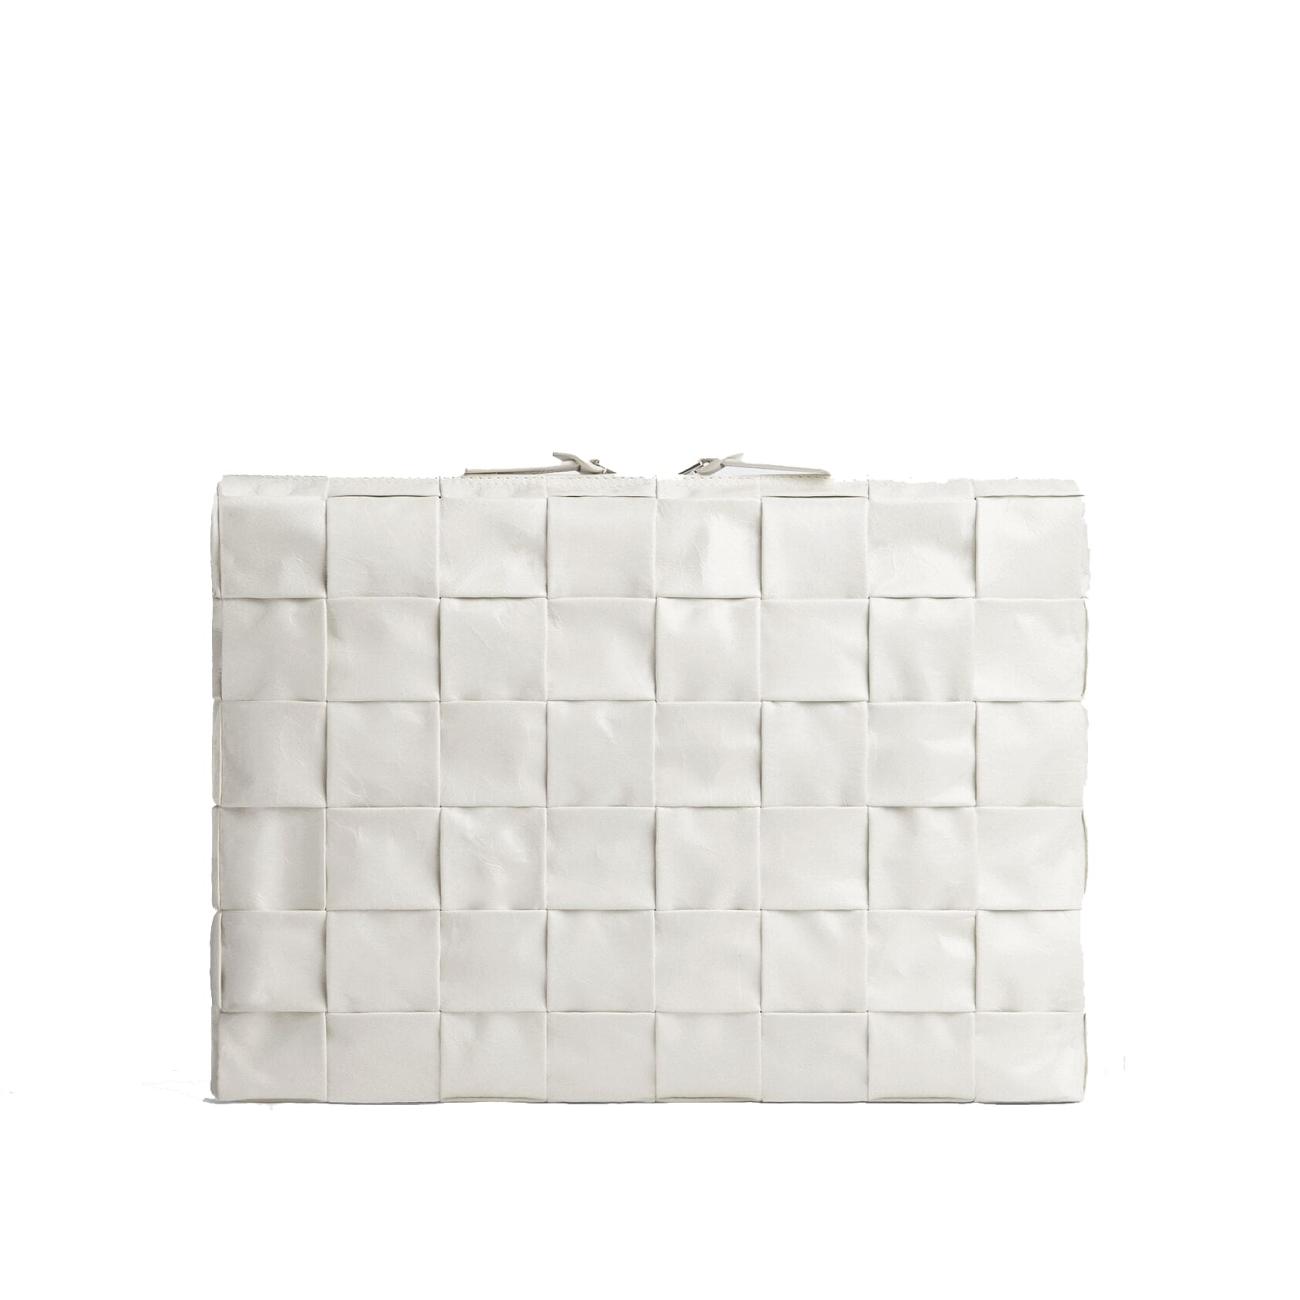 Document case made of leather with intrecciato weaving white